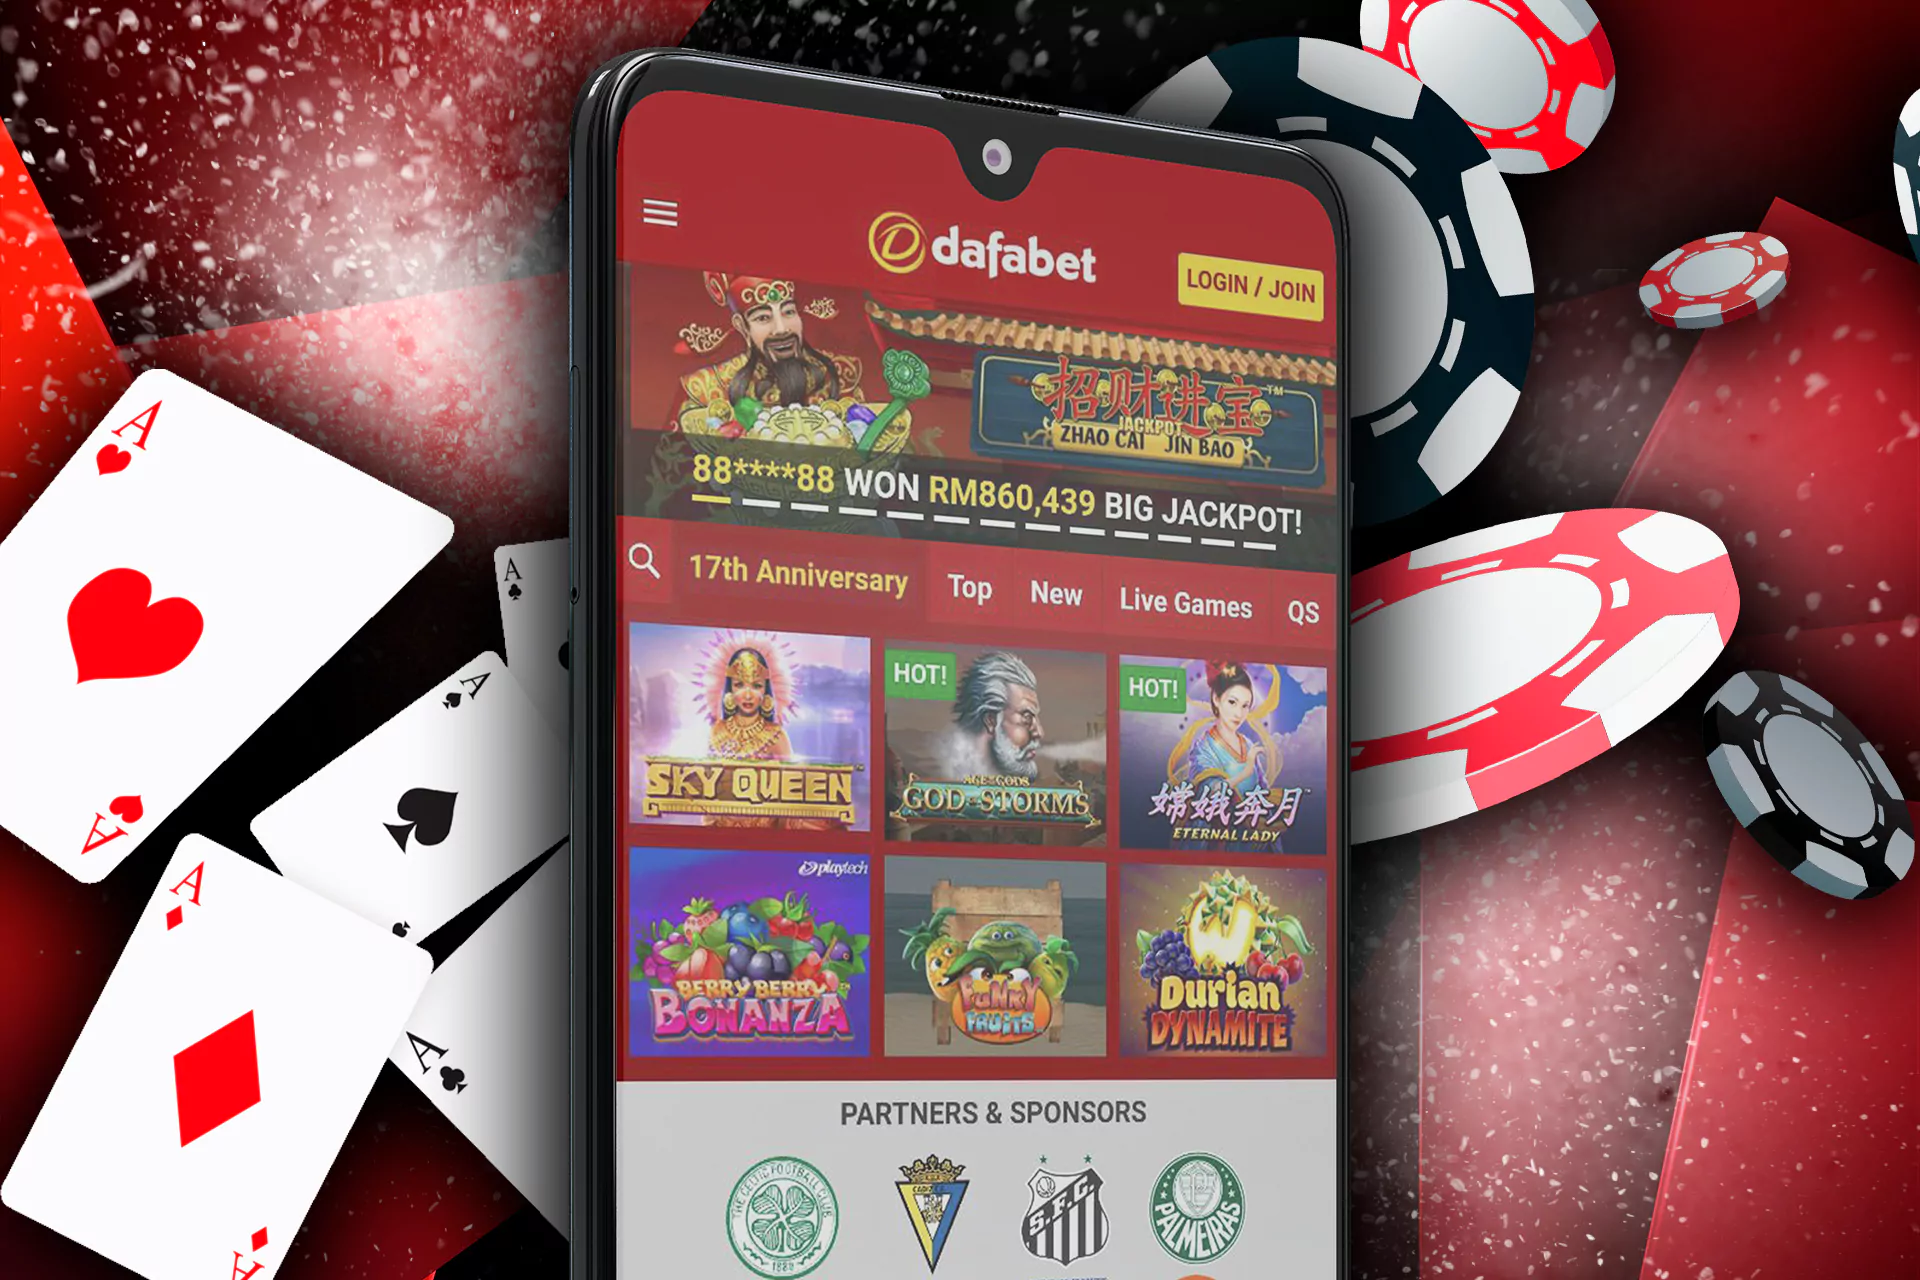 Visit the casino section in the Dafabet app.